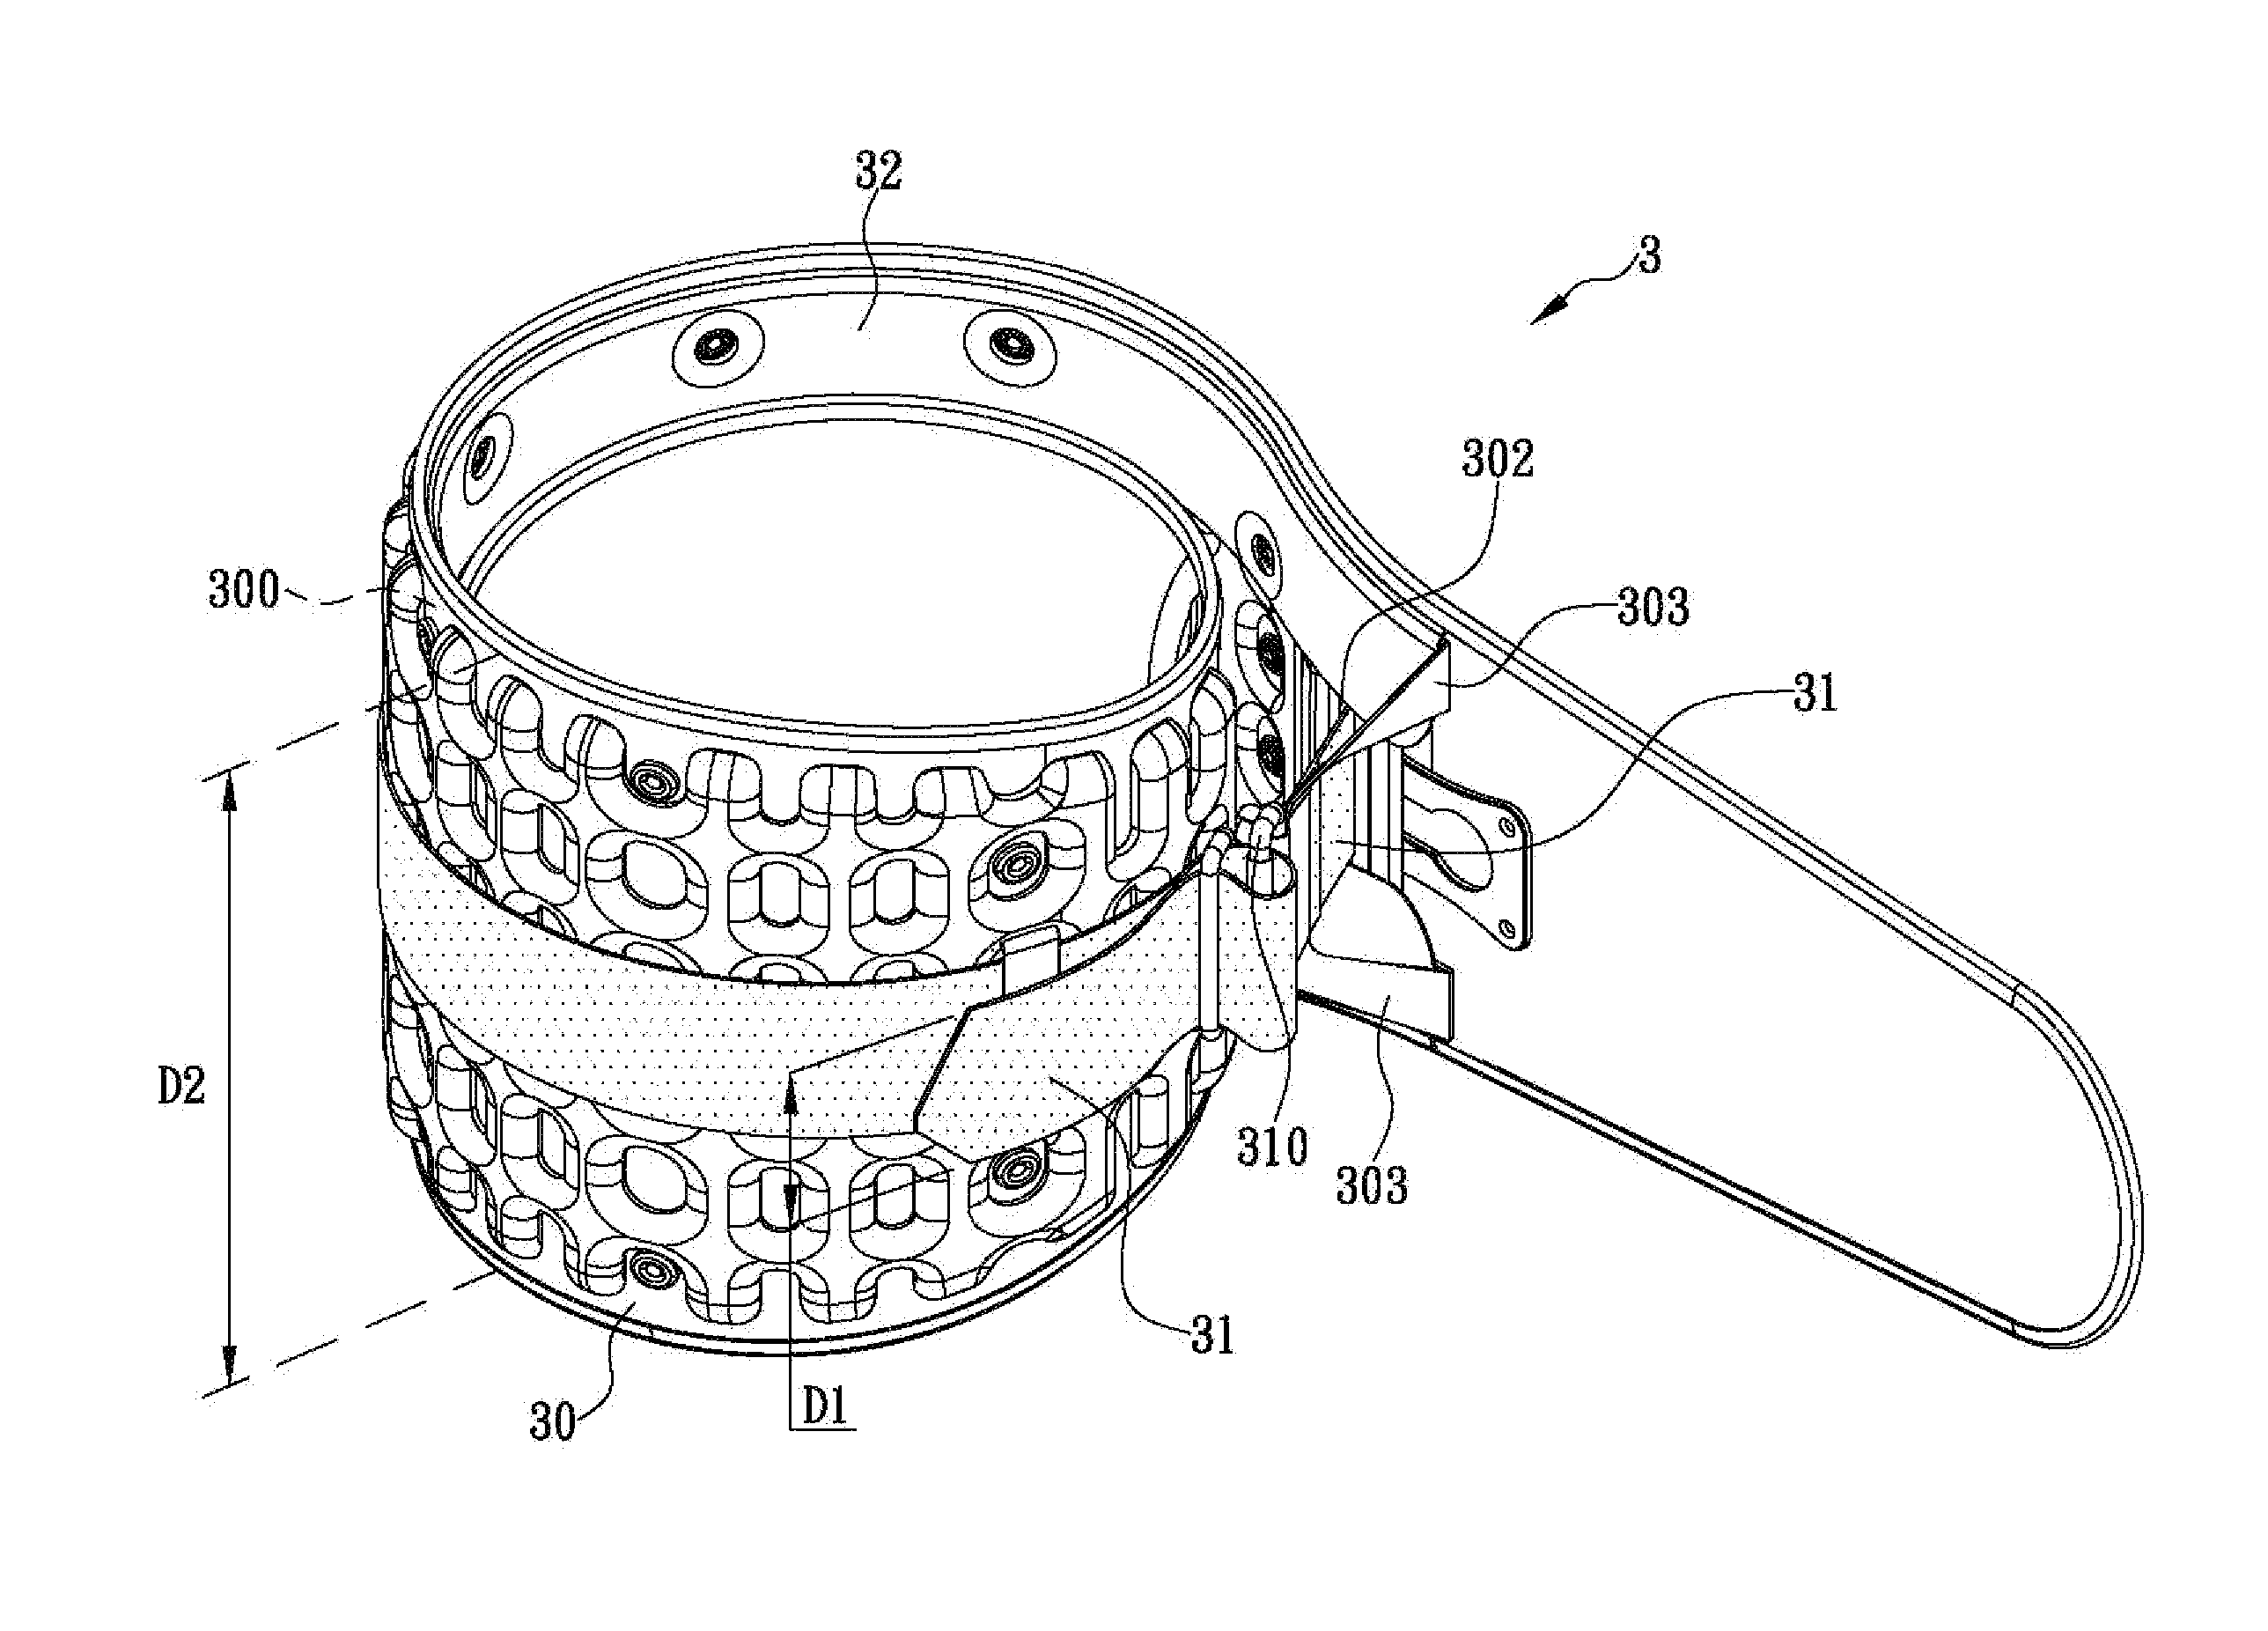 Air traction belt structure